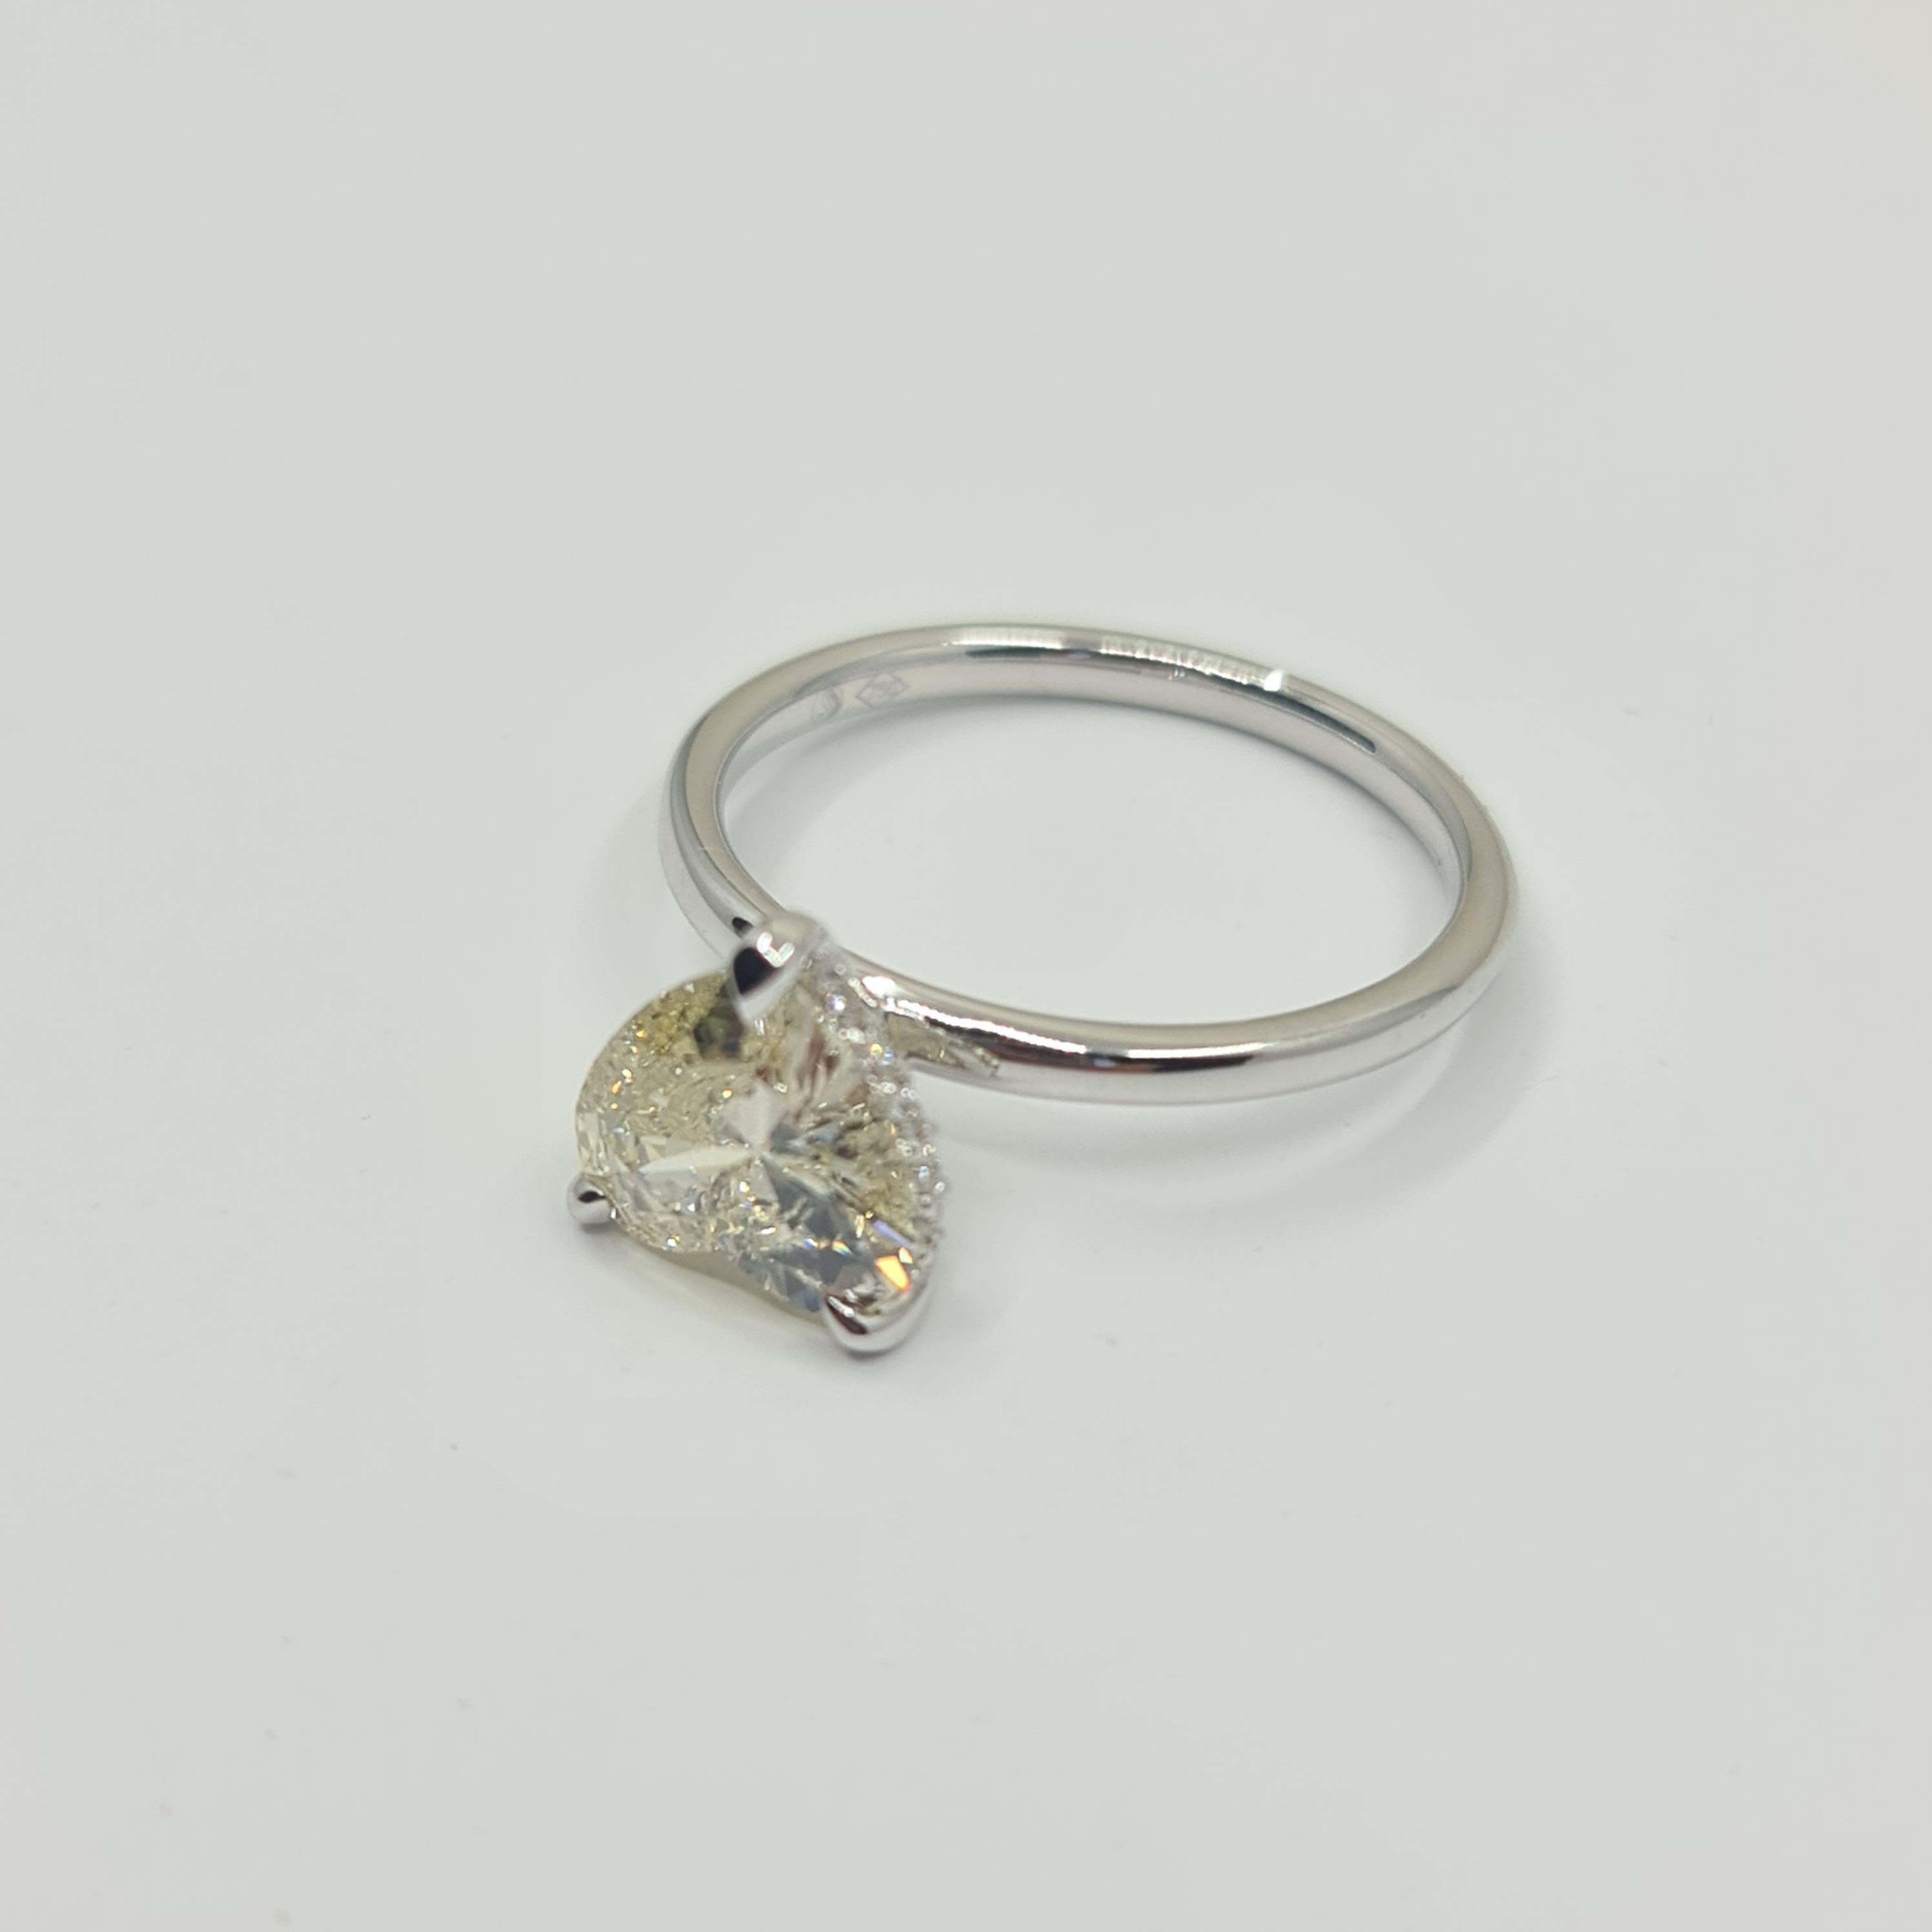 Exquisite GIA Certified 1.60 Carat Heart Diamond Ring with 0.07 Carat Halo G/VS For Sale 6